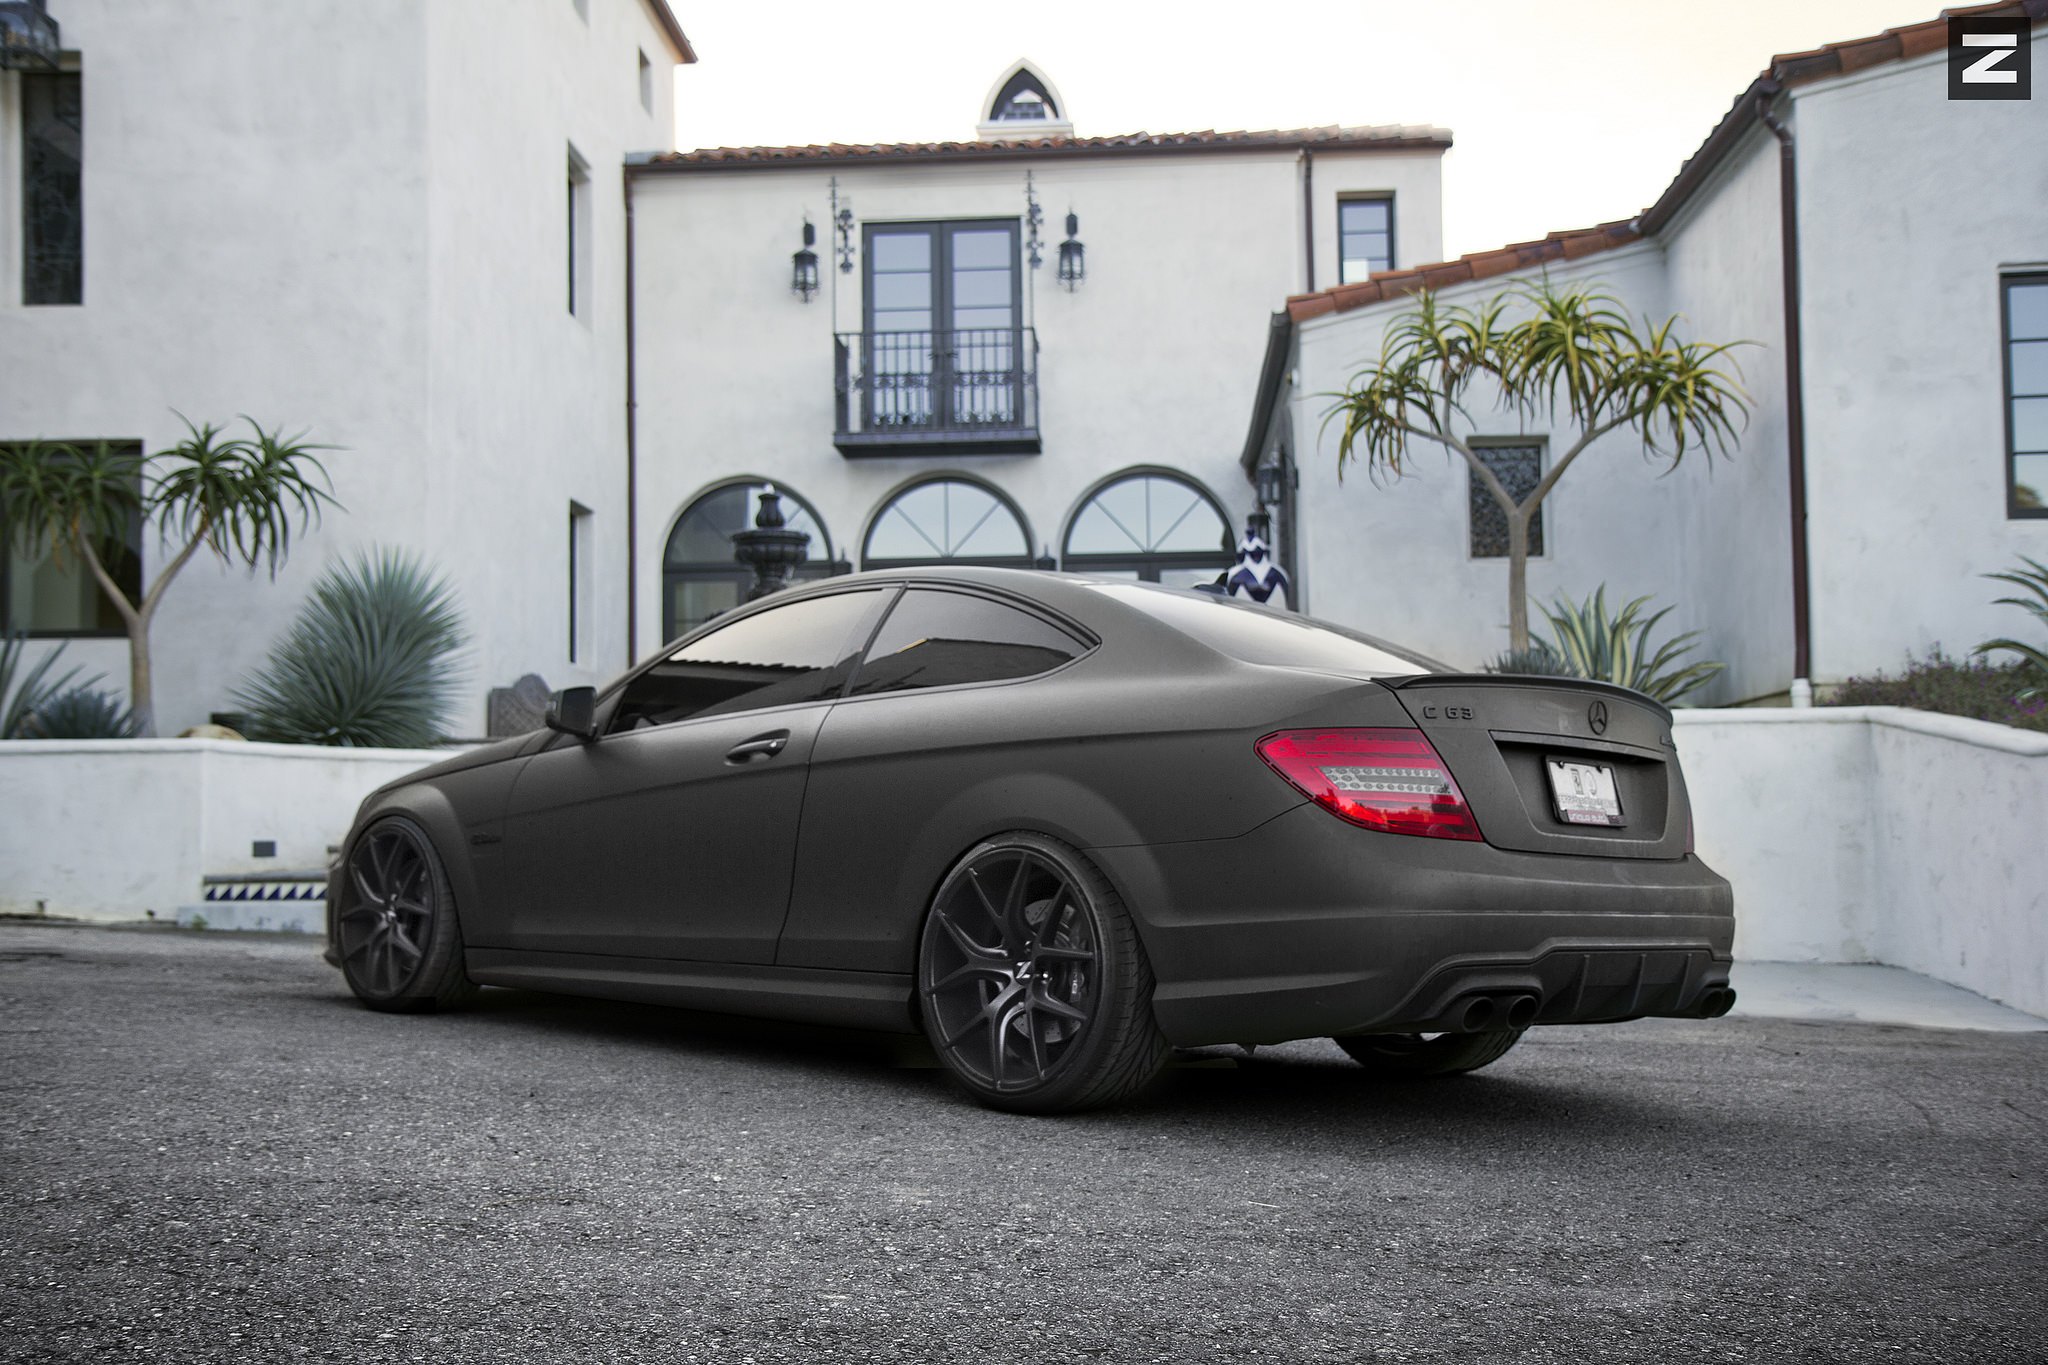 Black Zito Whels on Matte Gray Mercedes C Class - Photo by Zito Wheels